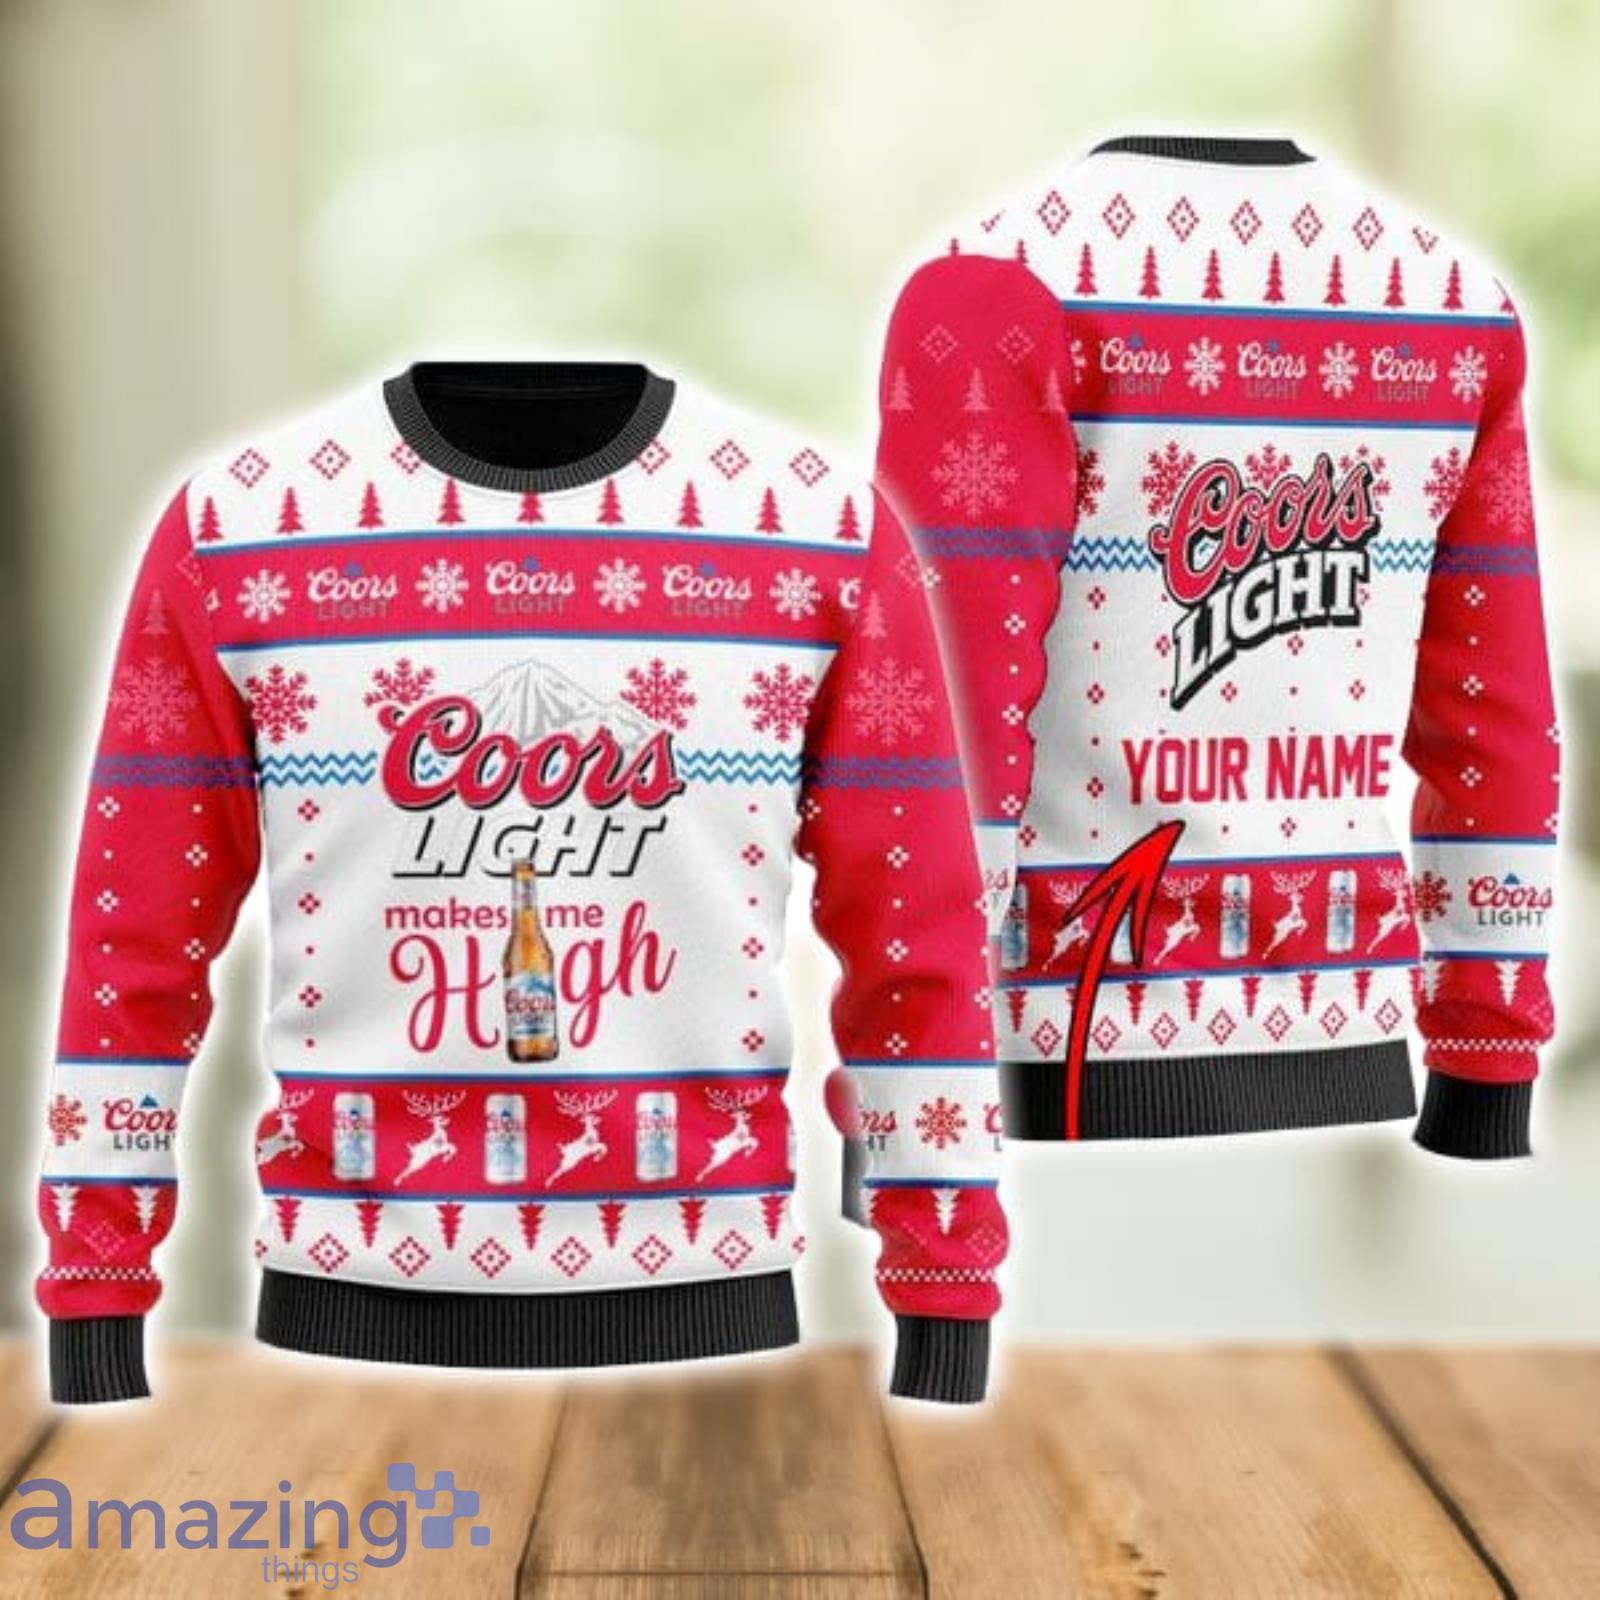 Coors Light Ugly Christmas Sweater Xmas Gift Men And Women Christmas Sweater